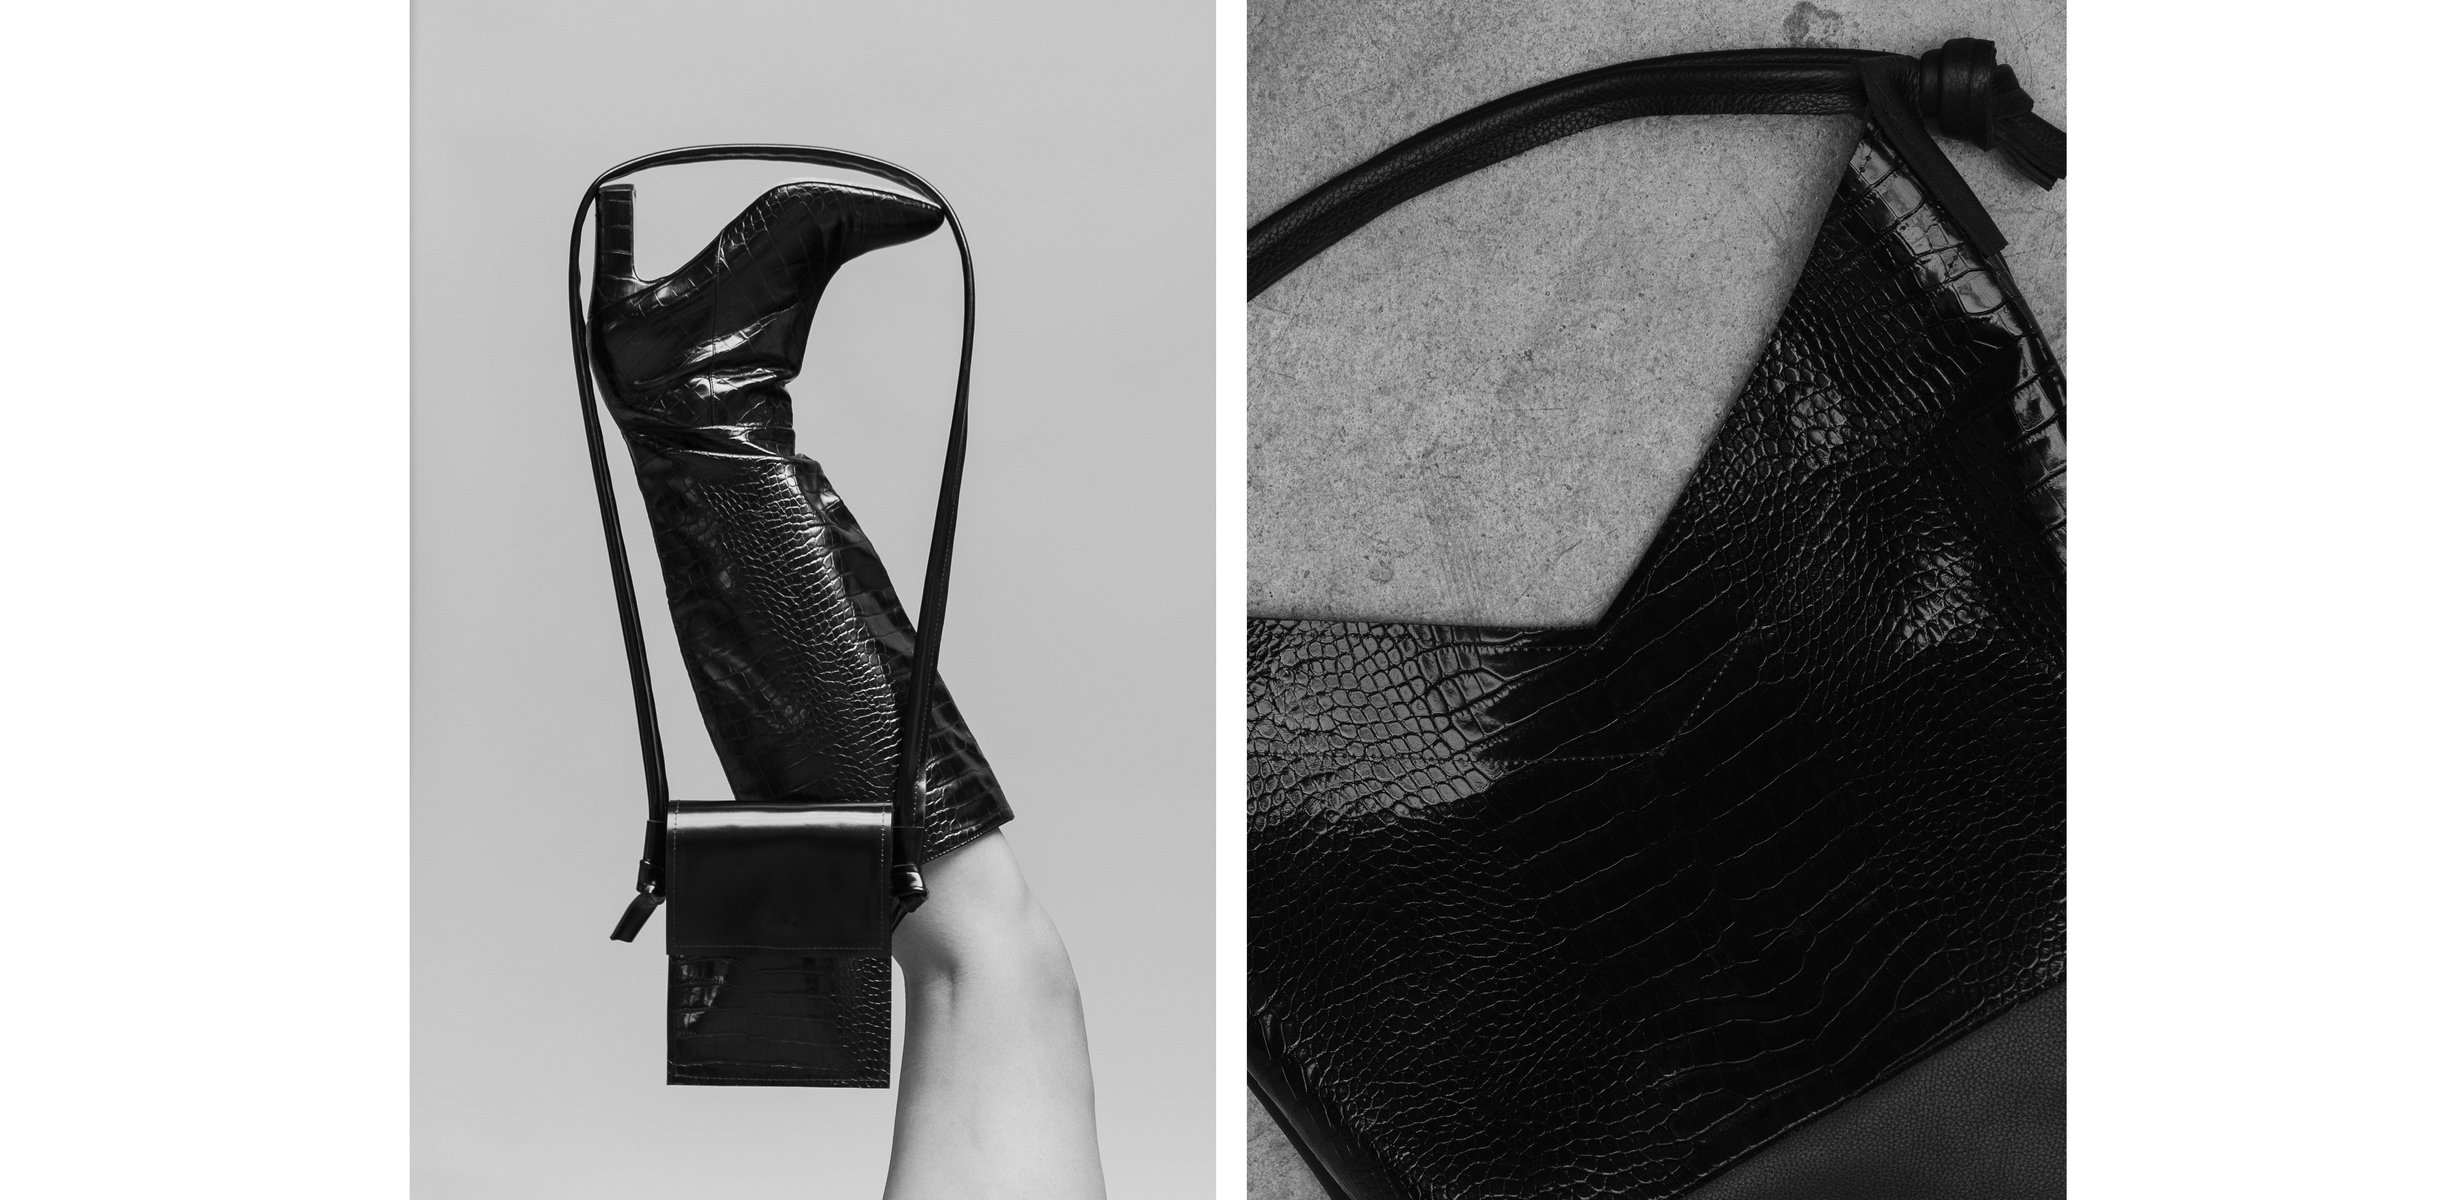  Diptych: 

Left image: a white leg wearing a knee-high black leather boot, raised straight up into the air with a shiny black leather Sister Epic bag hanging from the sole of the boot by the shoulder strap.

Right image: a close-up black and white image of a shiny black snake-skin leather shoulder bag from Sister epic, laying on a concrete floor. by Sydney SG